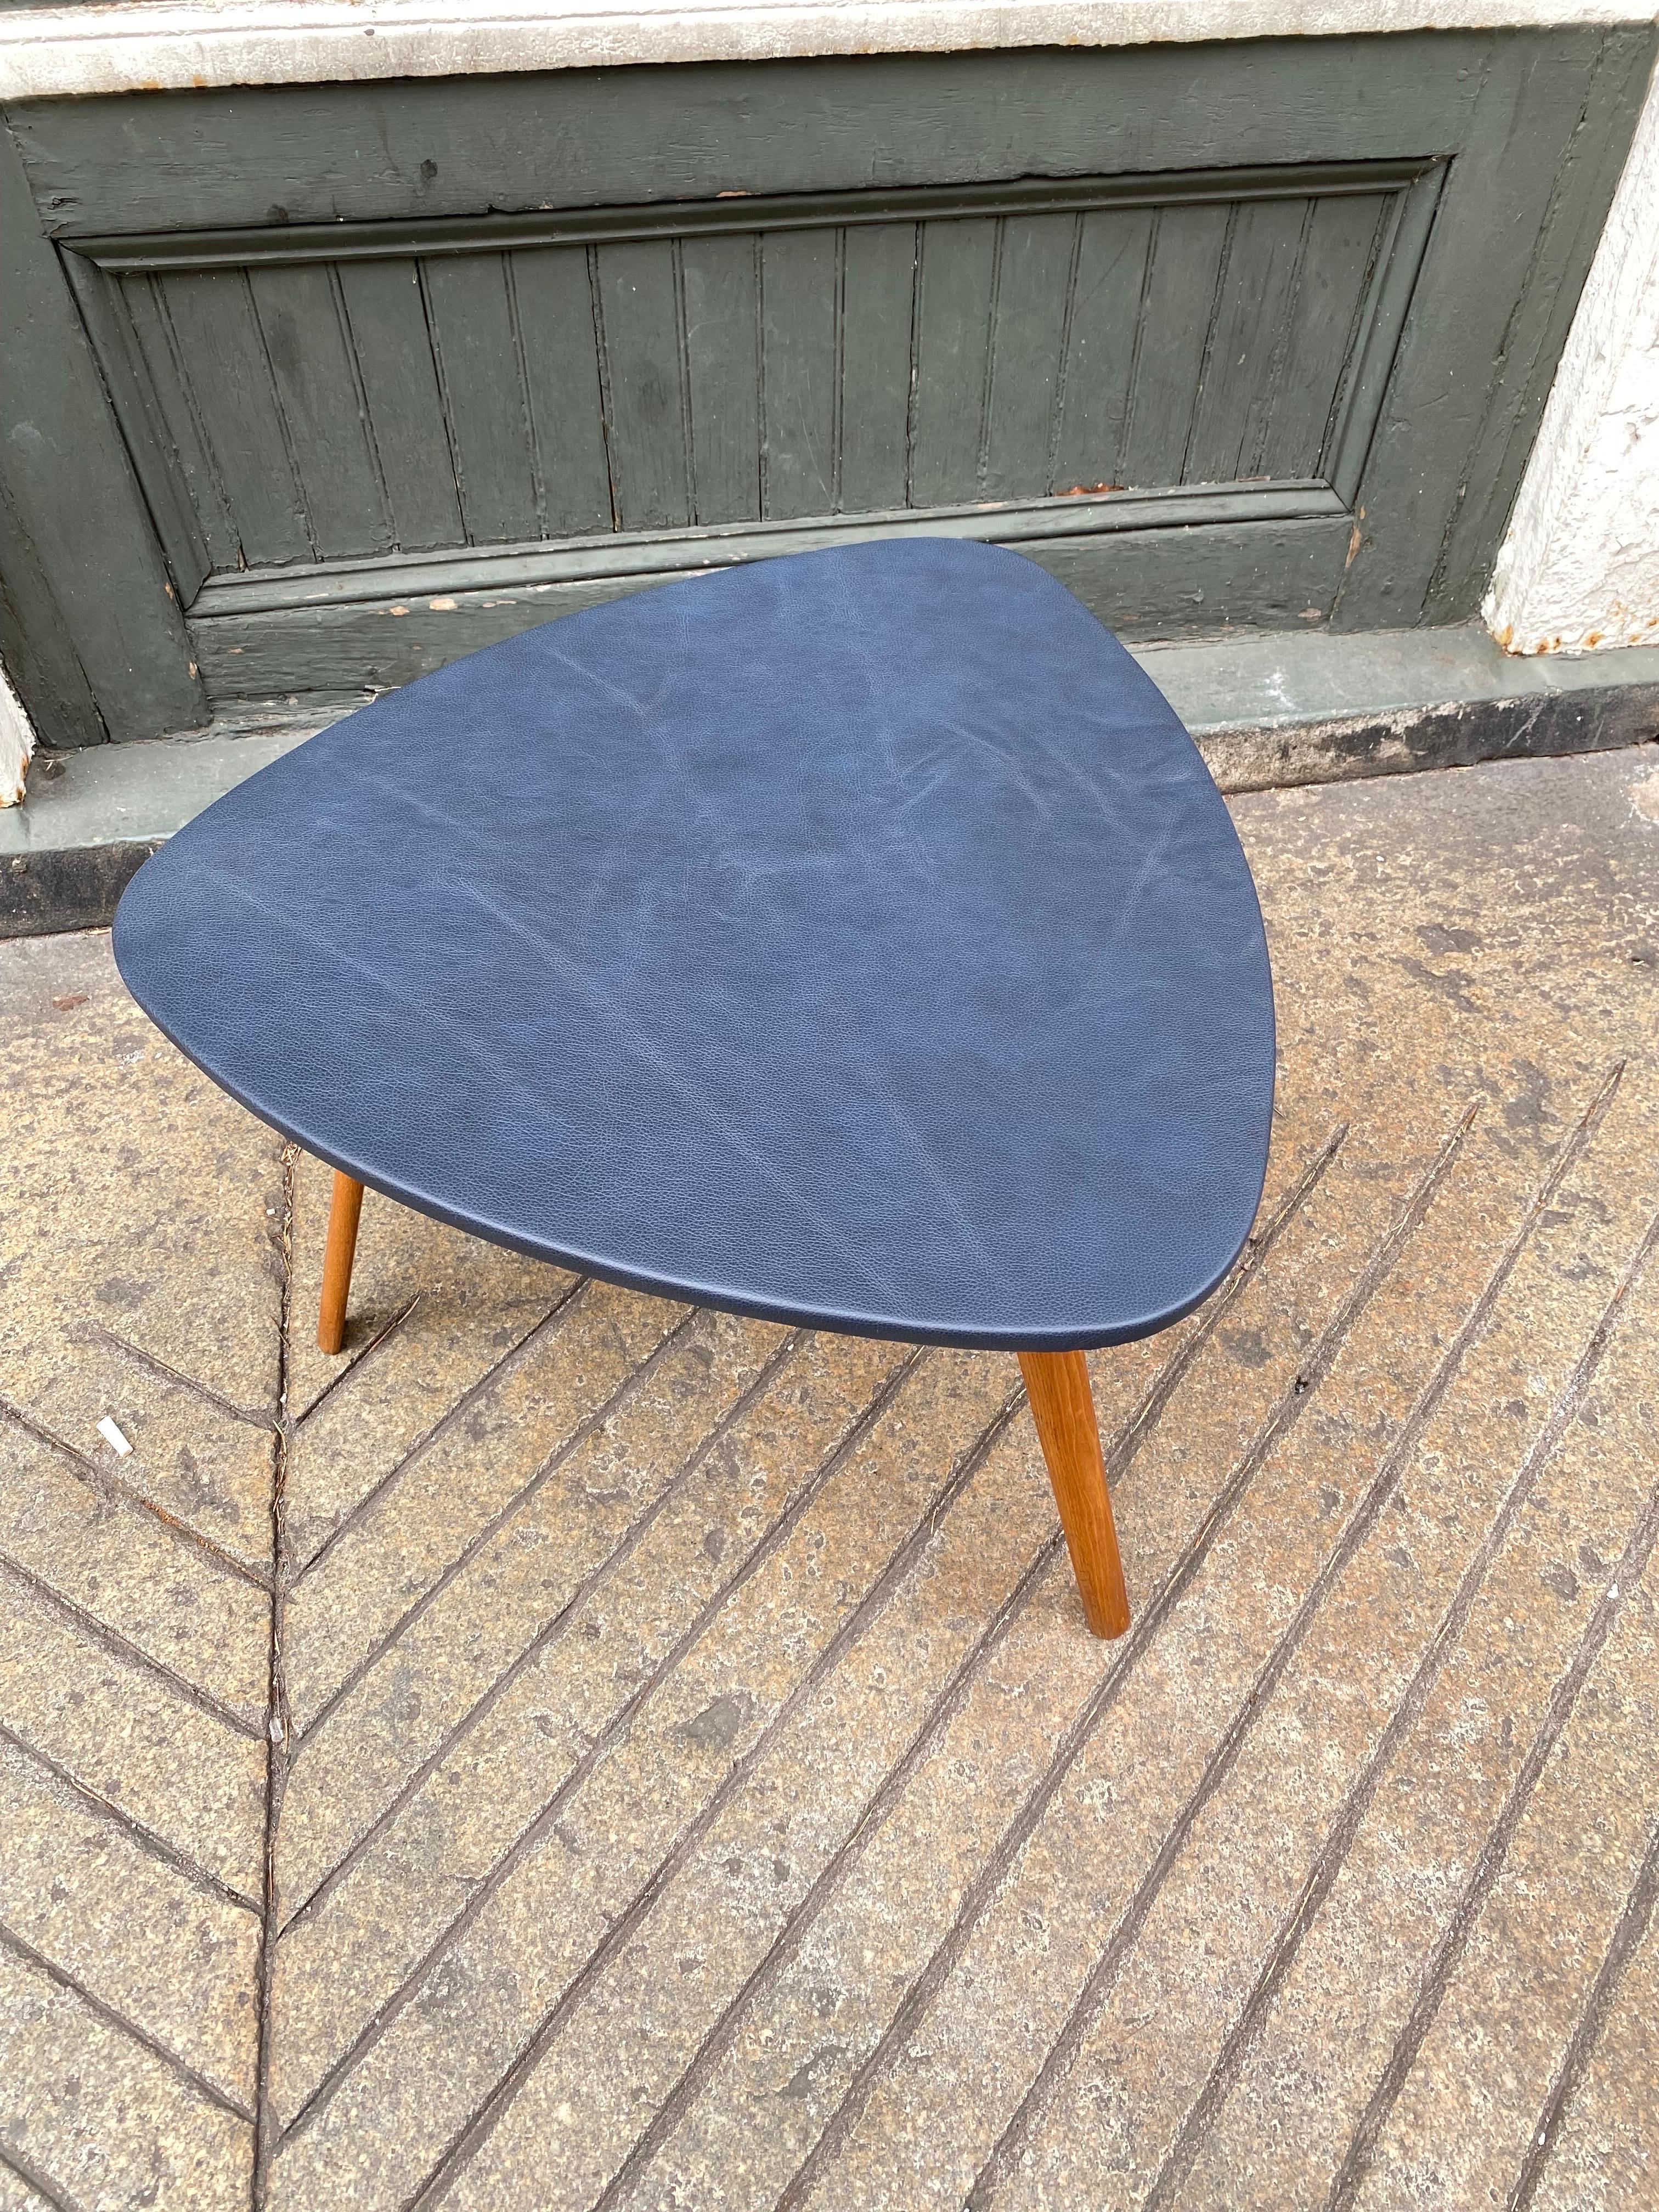 Bow-Wood 3 legged leather covered coffee table or end table. Simple graceful proportions with new dark blue leather. Wood is original and in nice condition, table retains it's original label to underside.